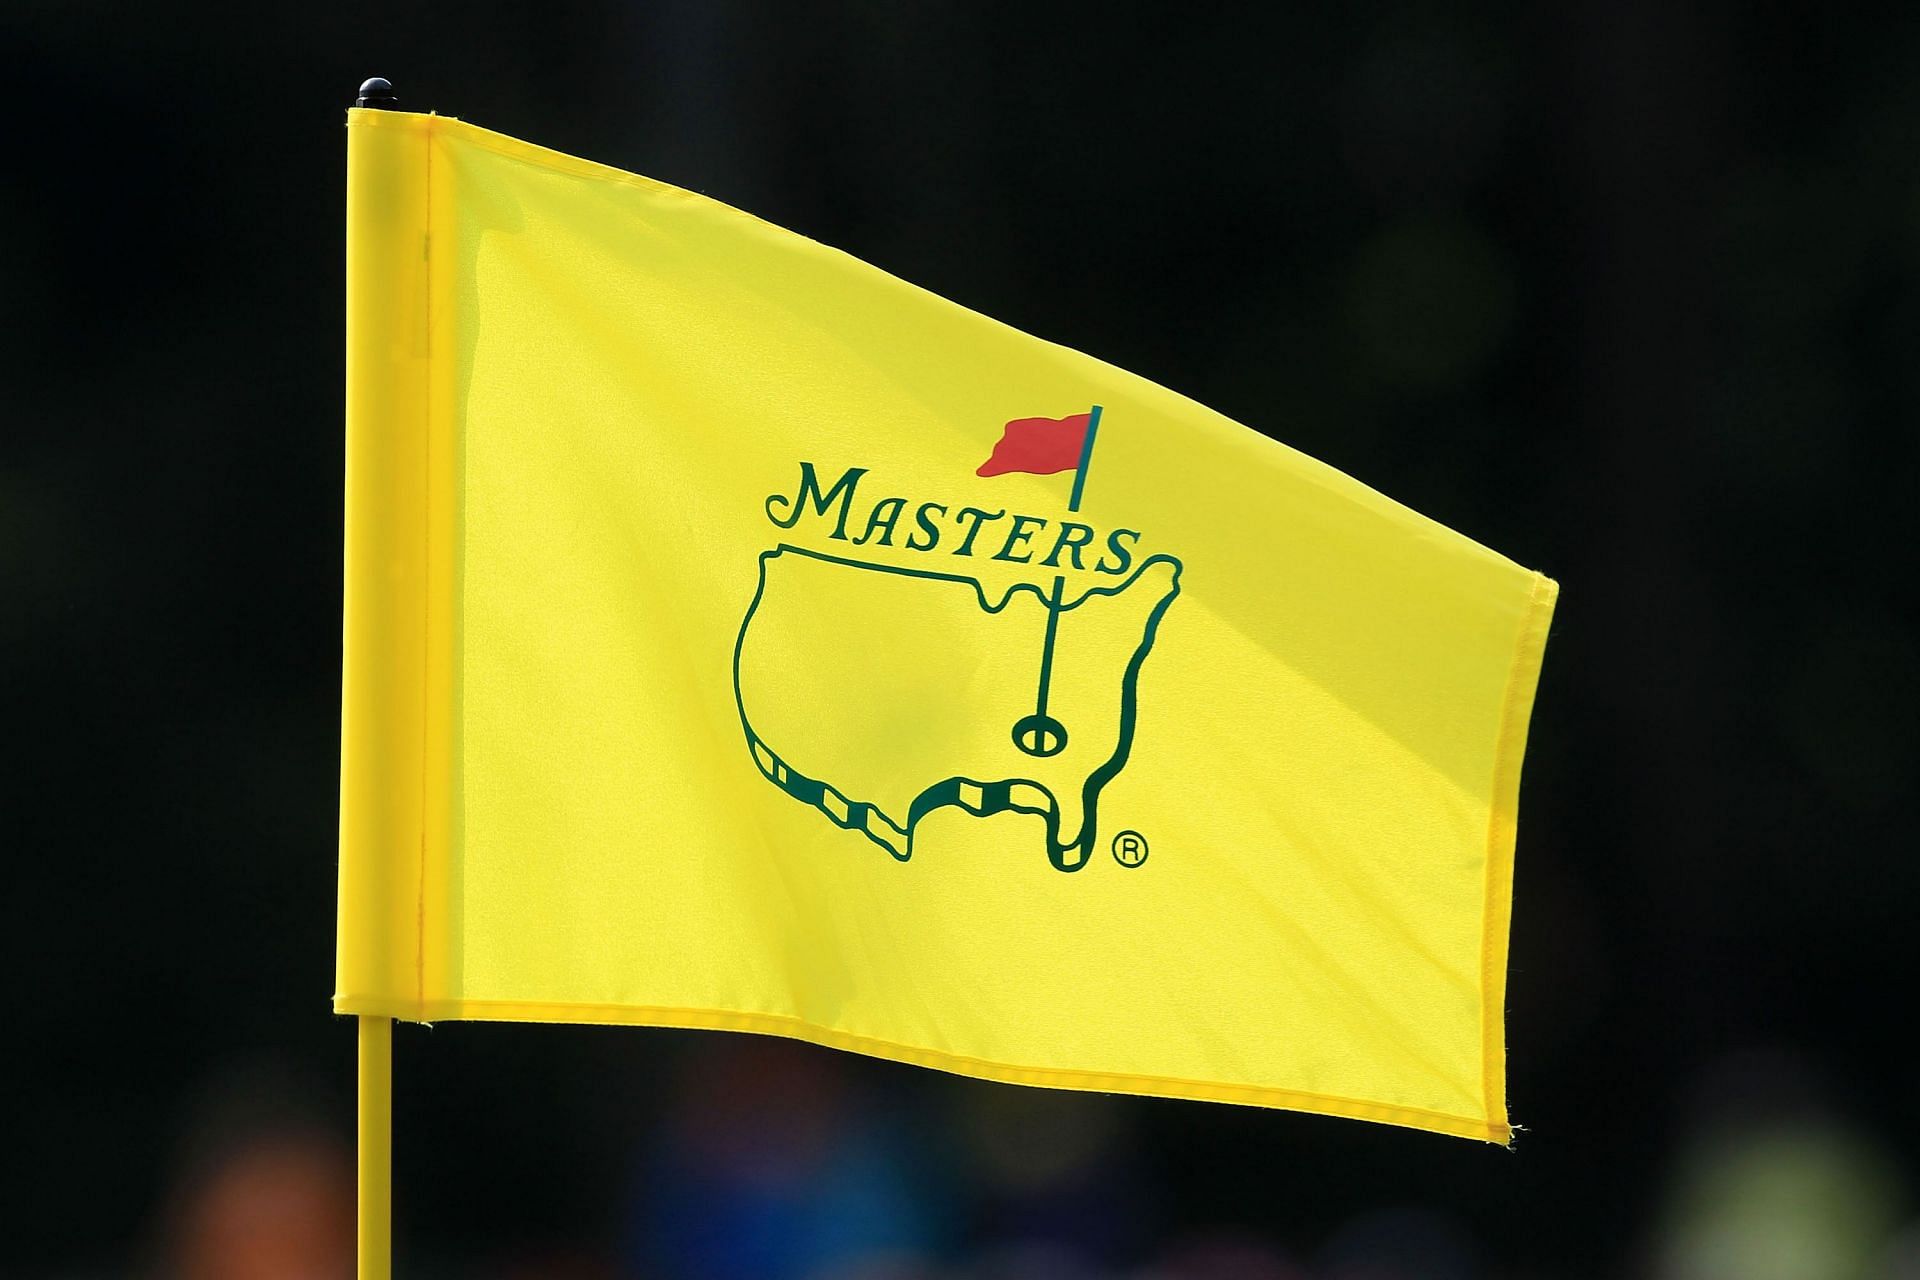 The 2023 Masters is set to begin on Thursday, April 6